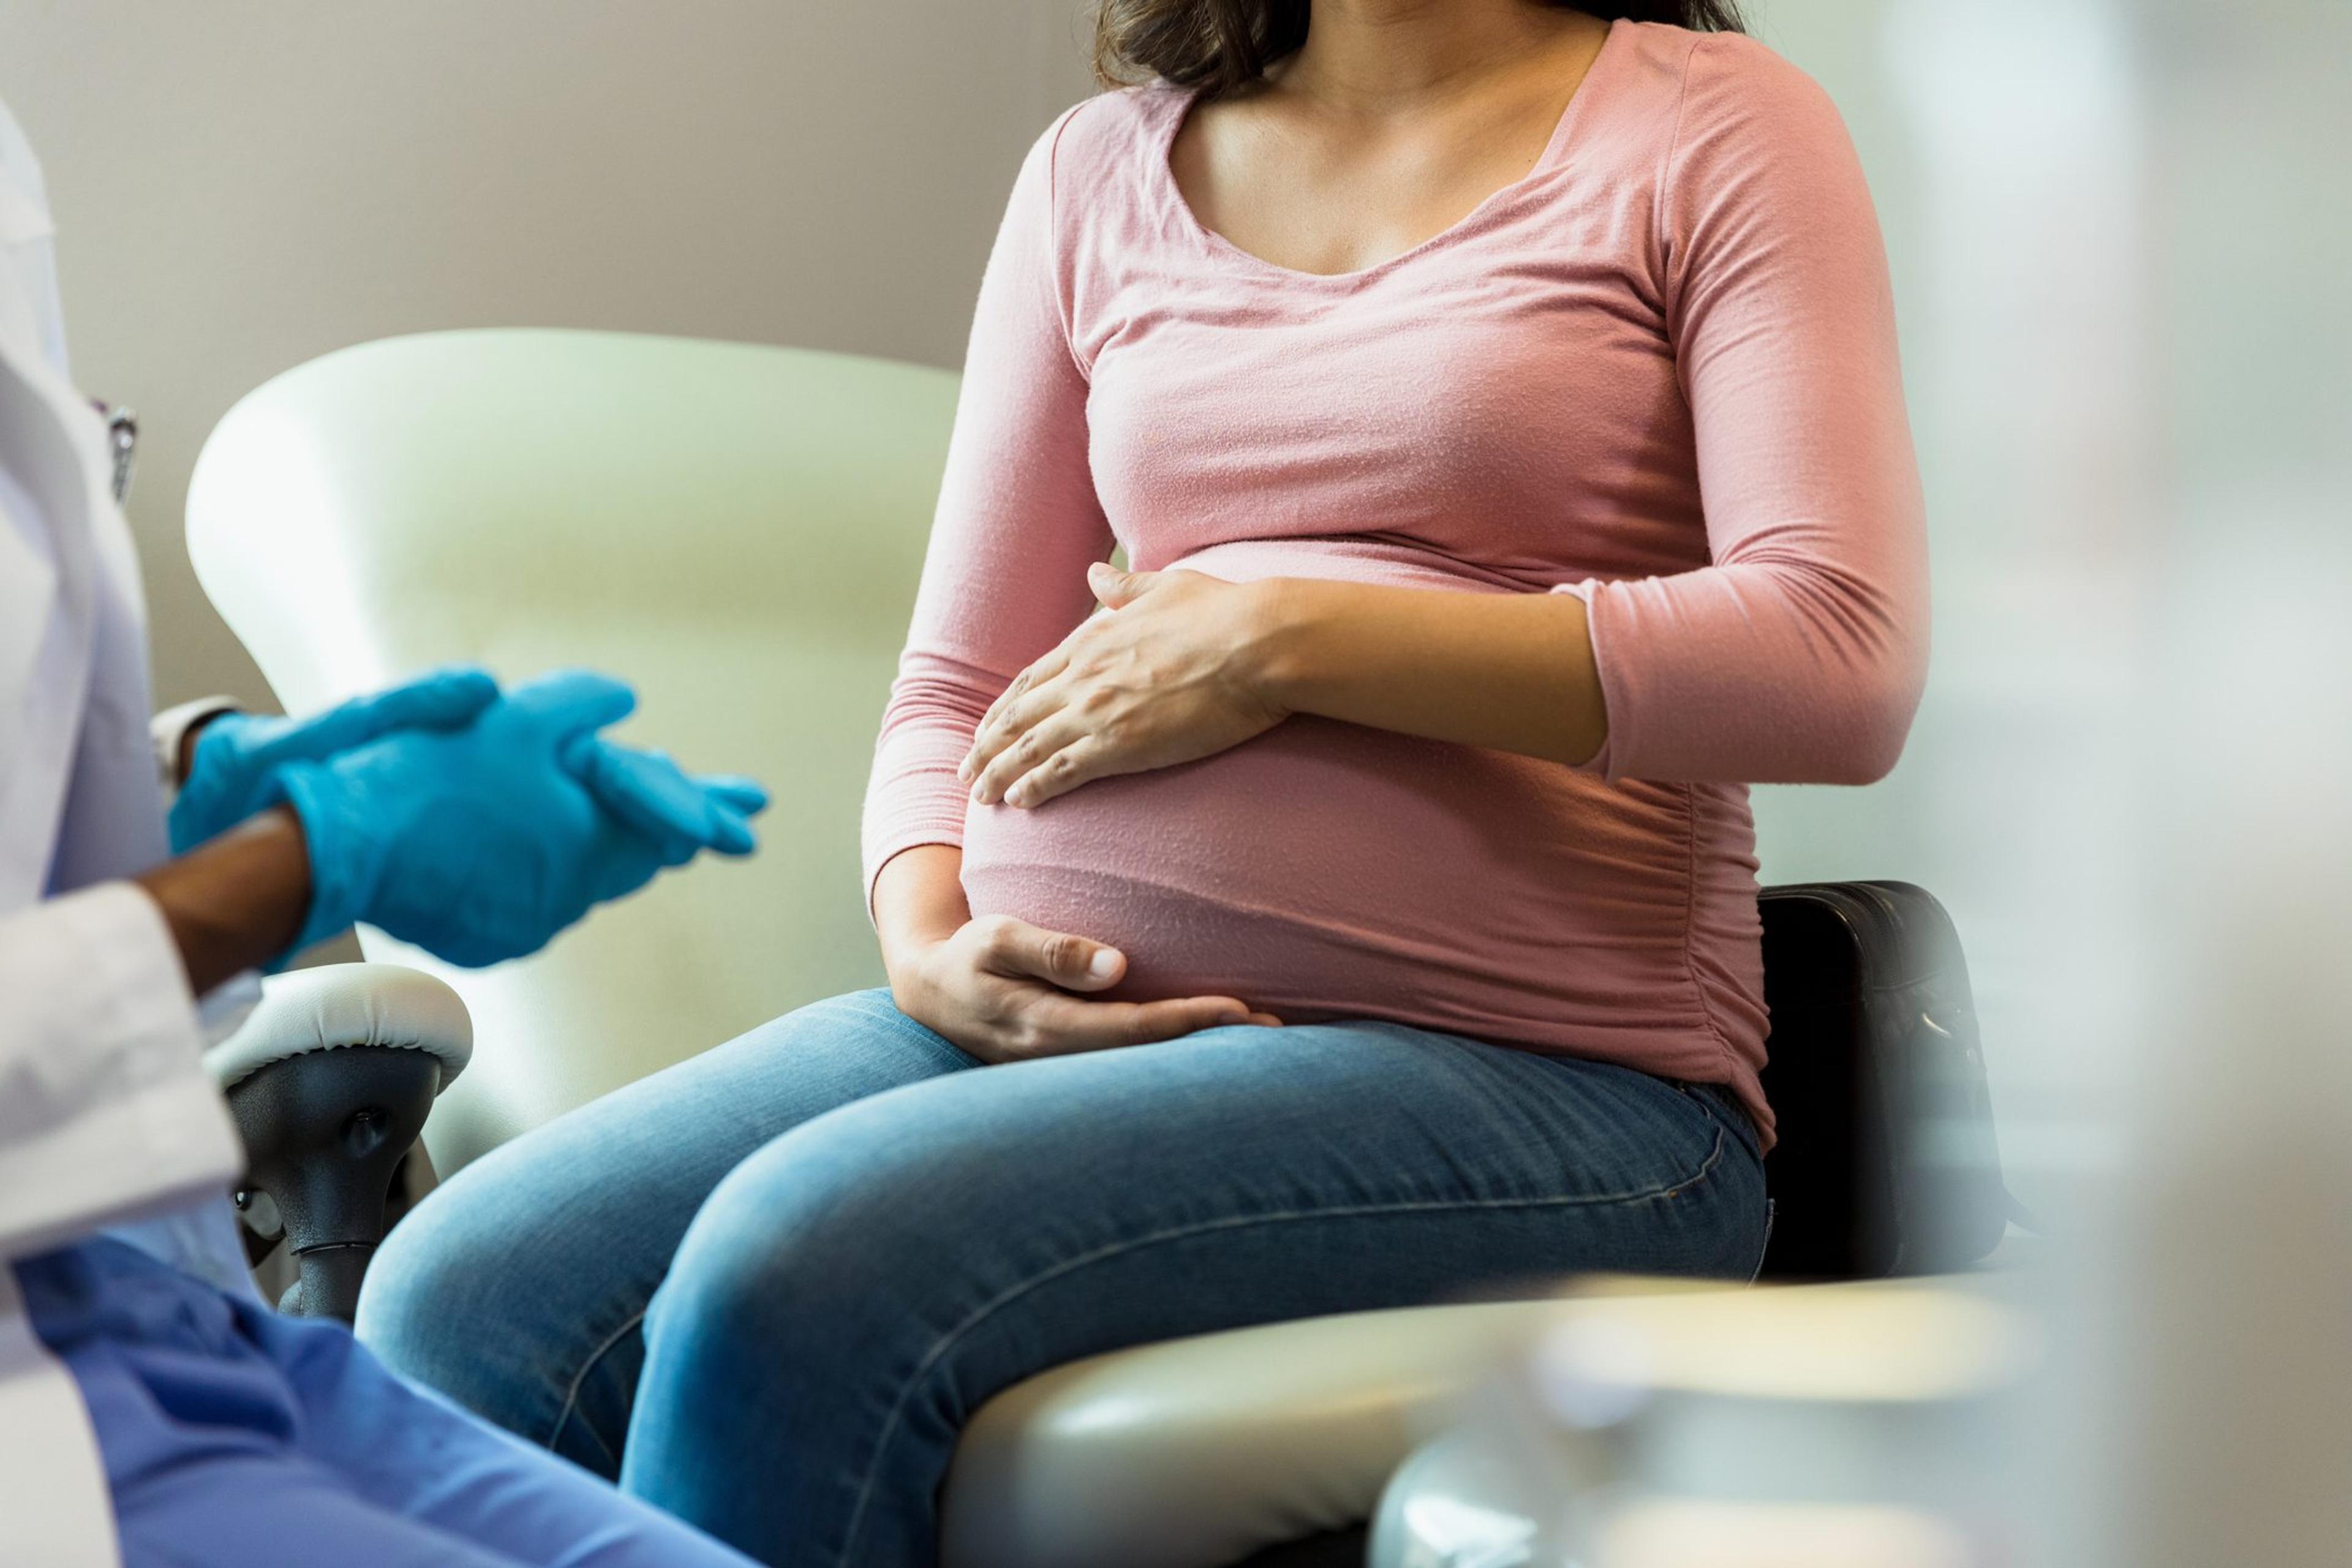 Group B Strep most often occurs in infants, older adults, and people with serious medical conditions. It's important to know the risks.